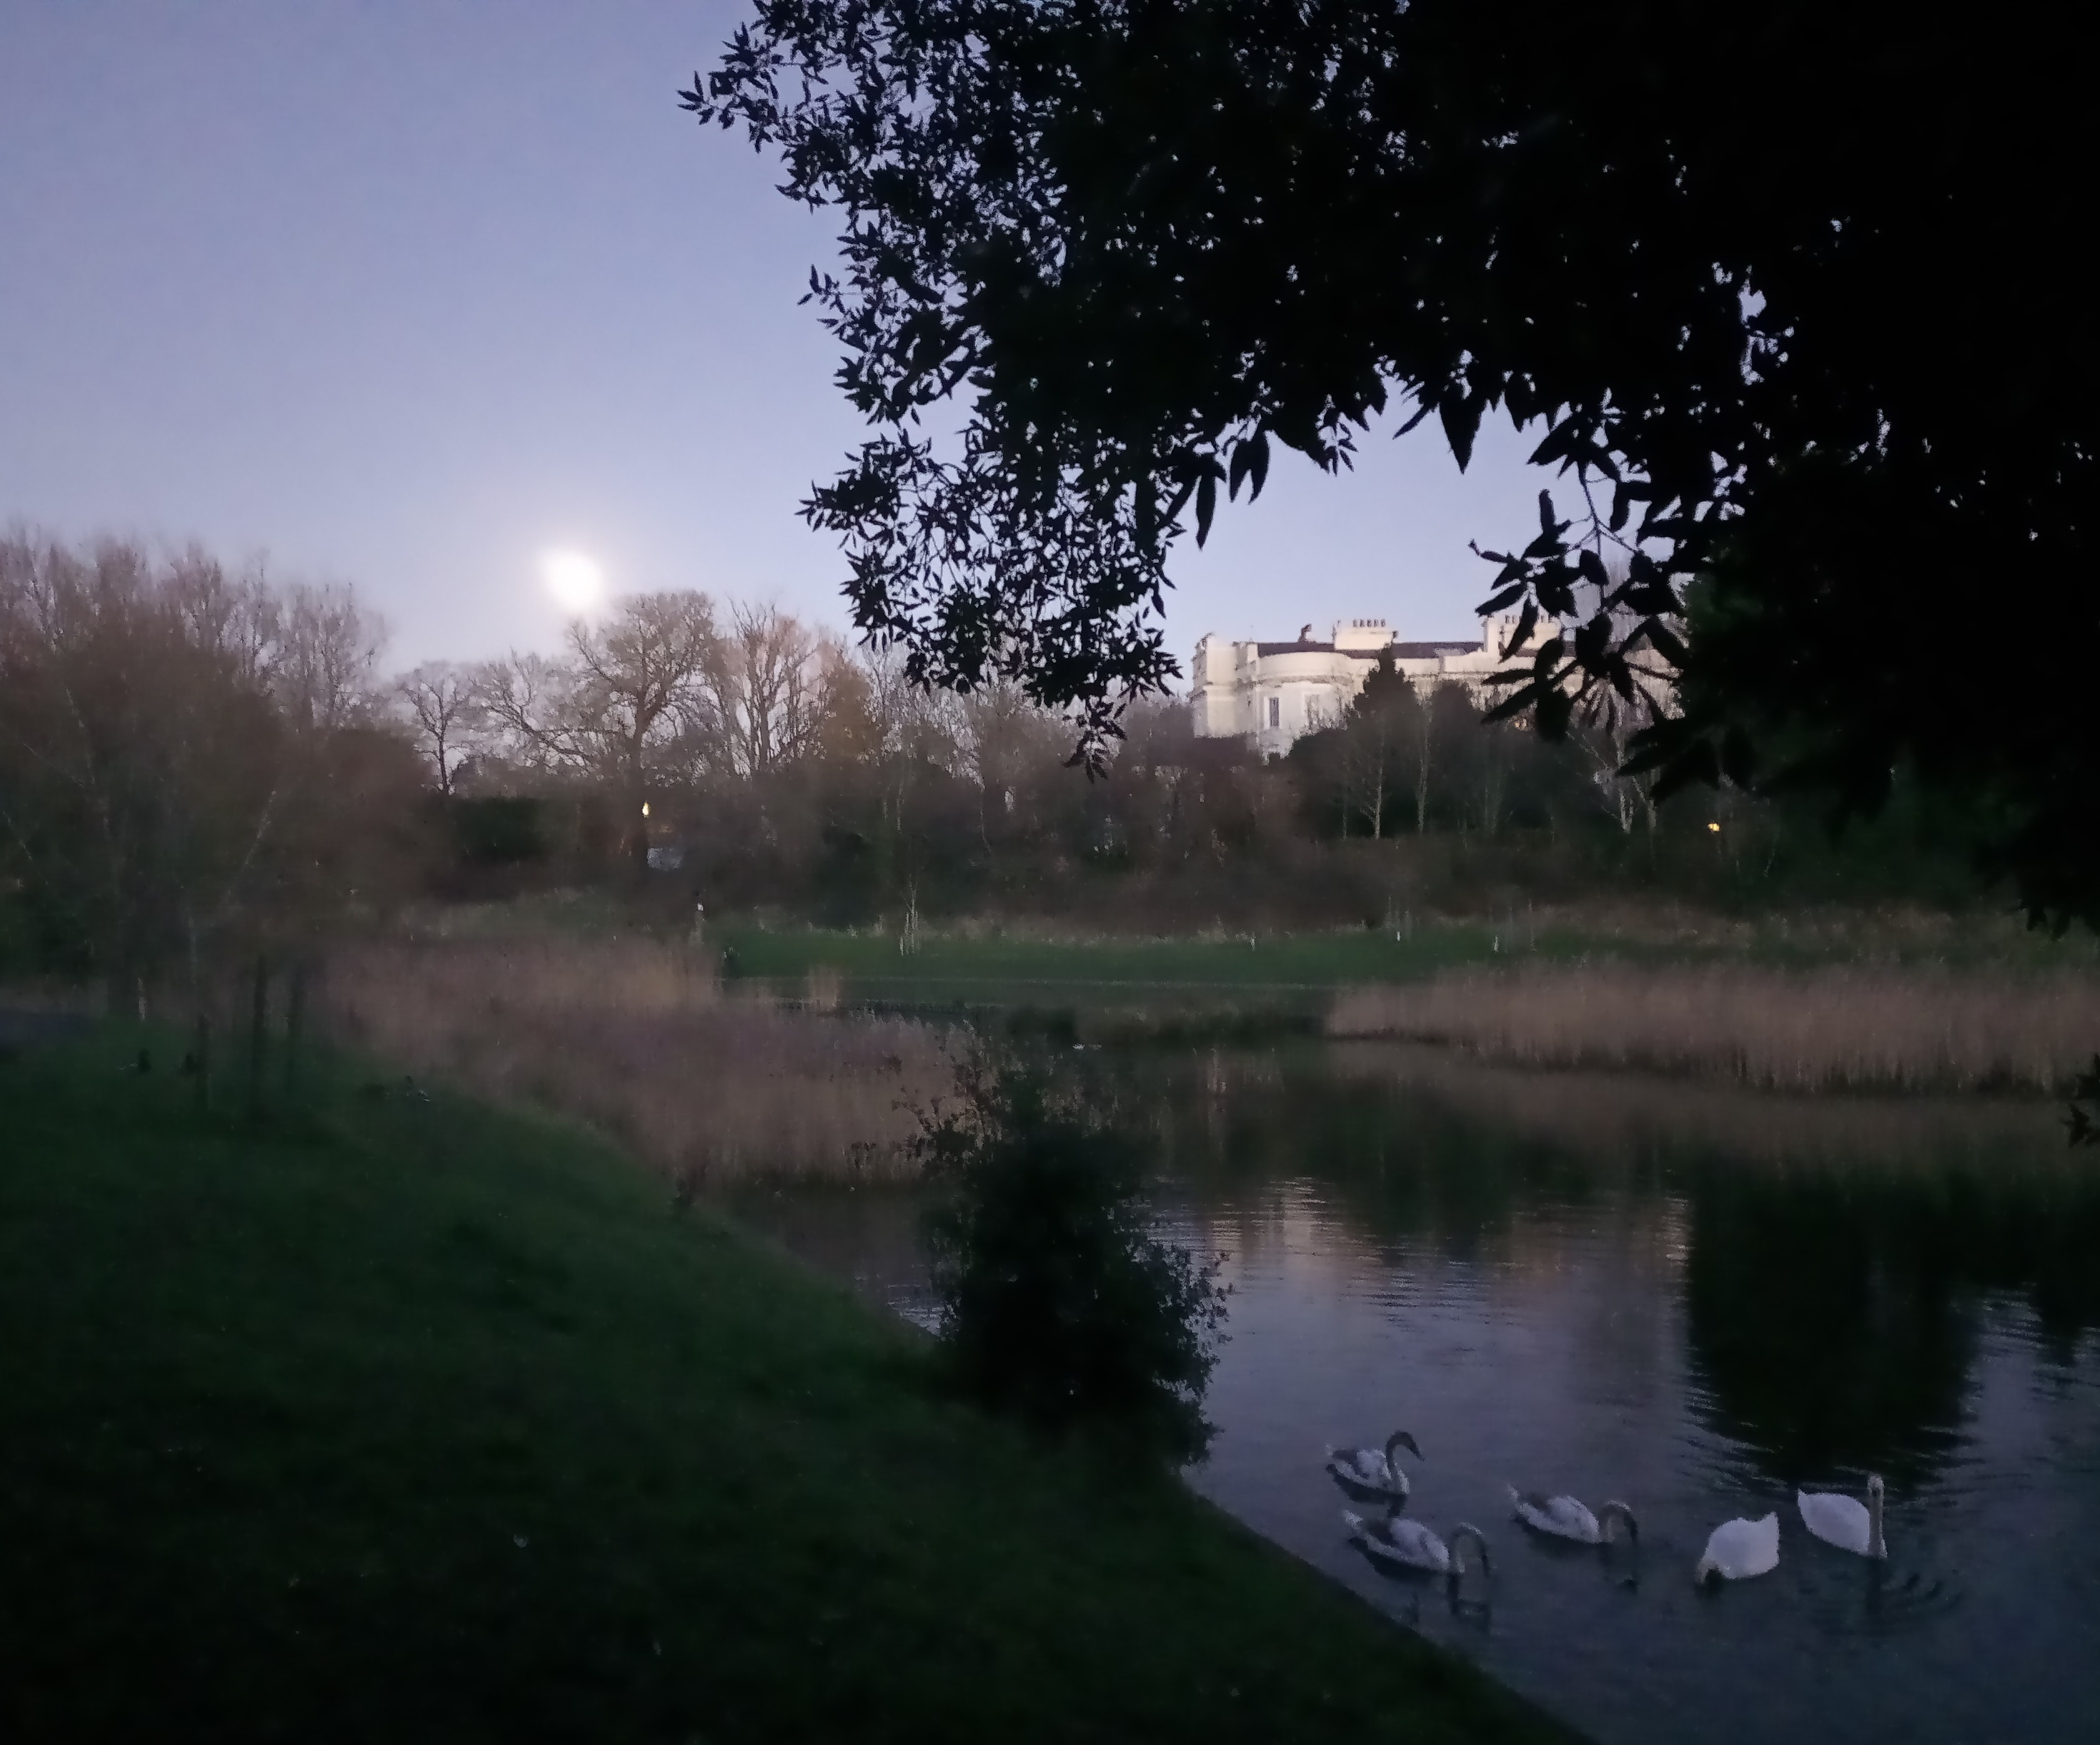 The Park by Moonlight